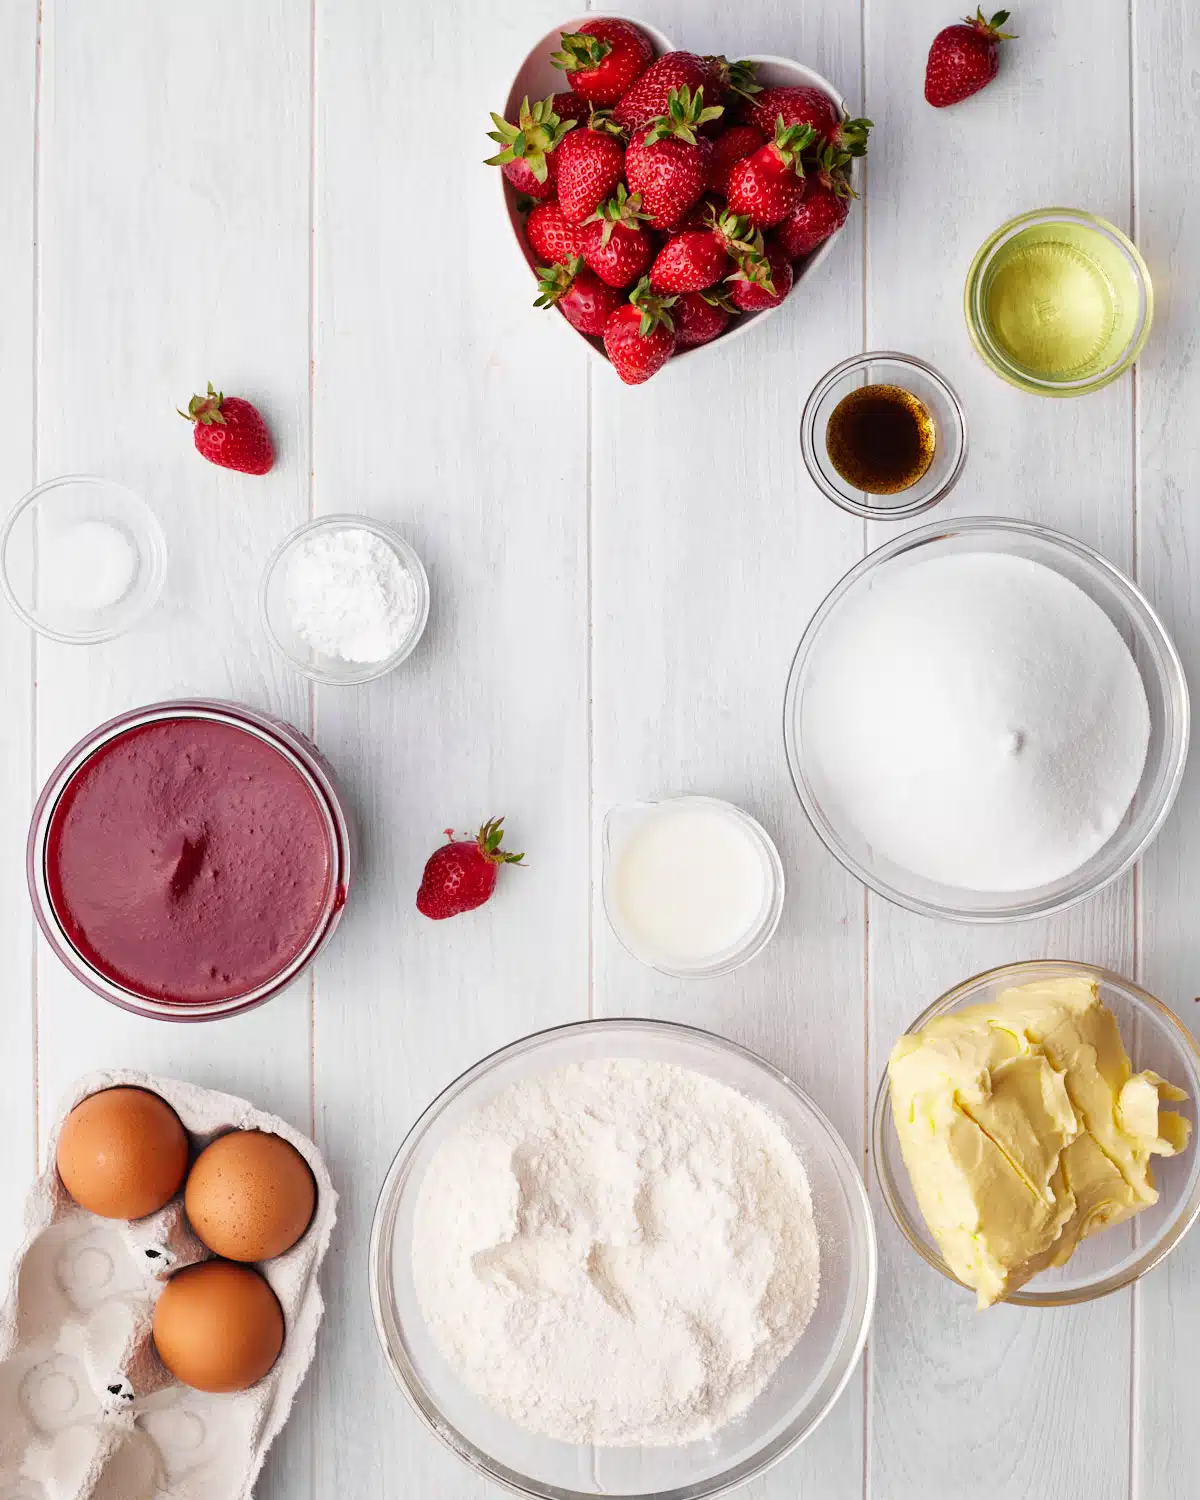 ingredients to make strawberry cupcakes and strawberry filling.  strawberries, strawberry puree, cake flour, butter, sugar, eggs, milk, vegetable oil, vanilla. 